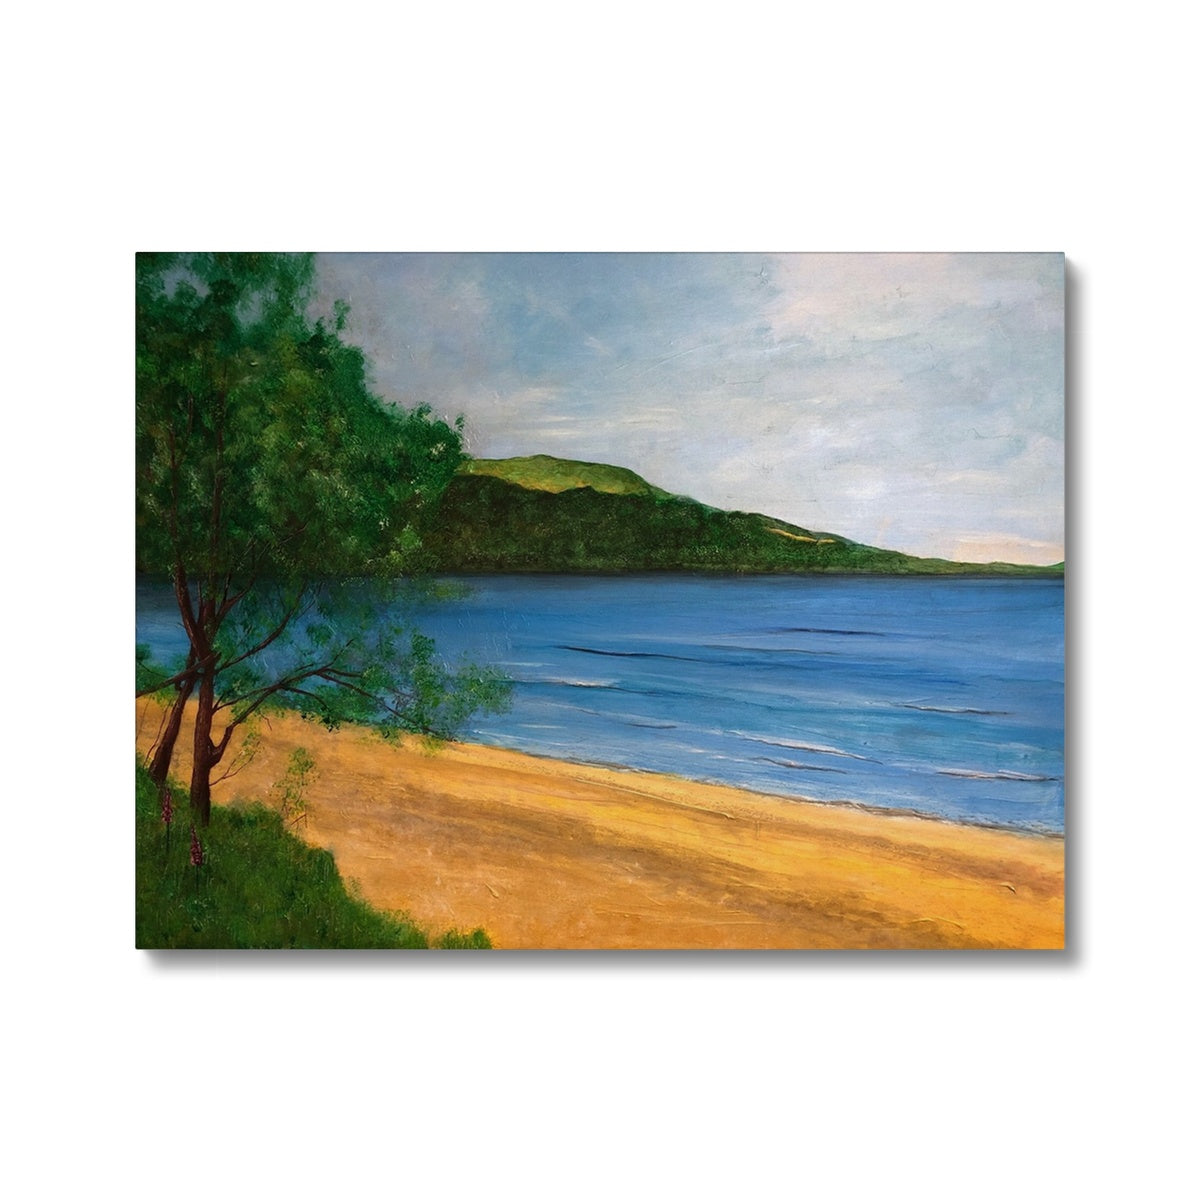 Loch Rannoch Painting | Canvas From Scotland-Contemporary Stretched Canvas Prints-Scottish Lochs & Mountains Art Gallery-24"x18"-Paintings, Prints, Homeware, Art Gifts From Scotland By Scottish Artist Kevin Hunter